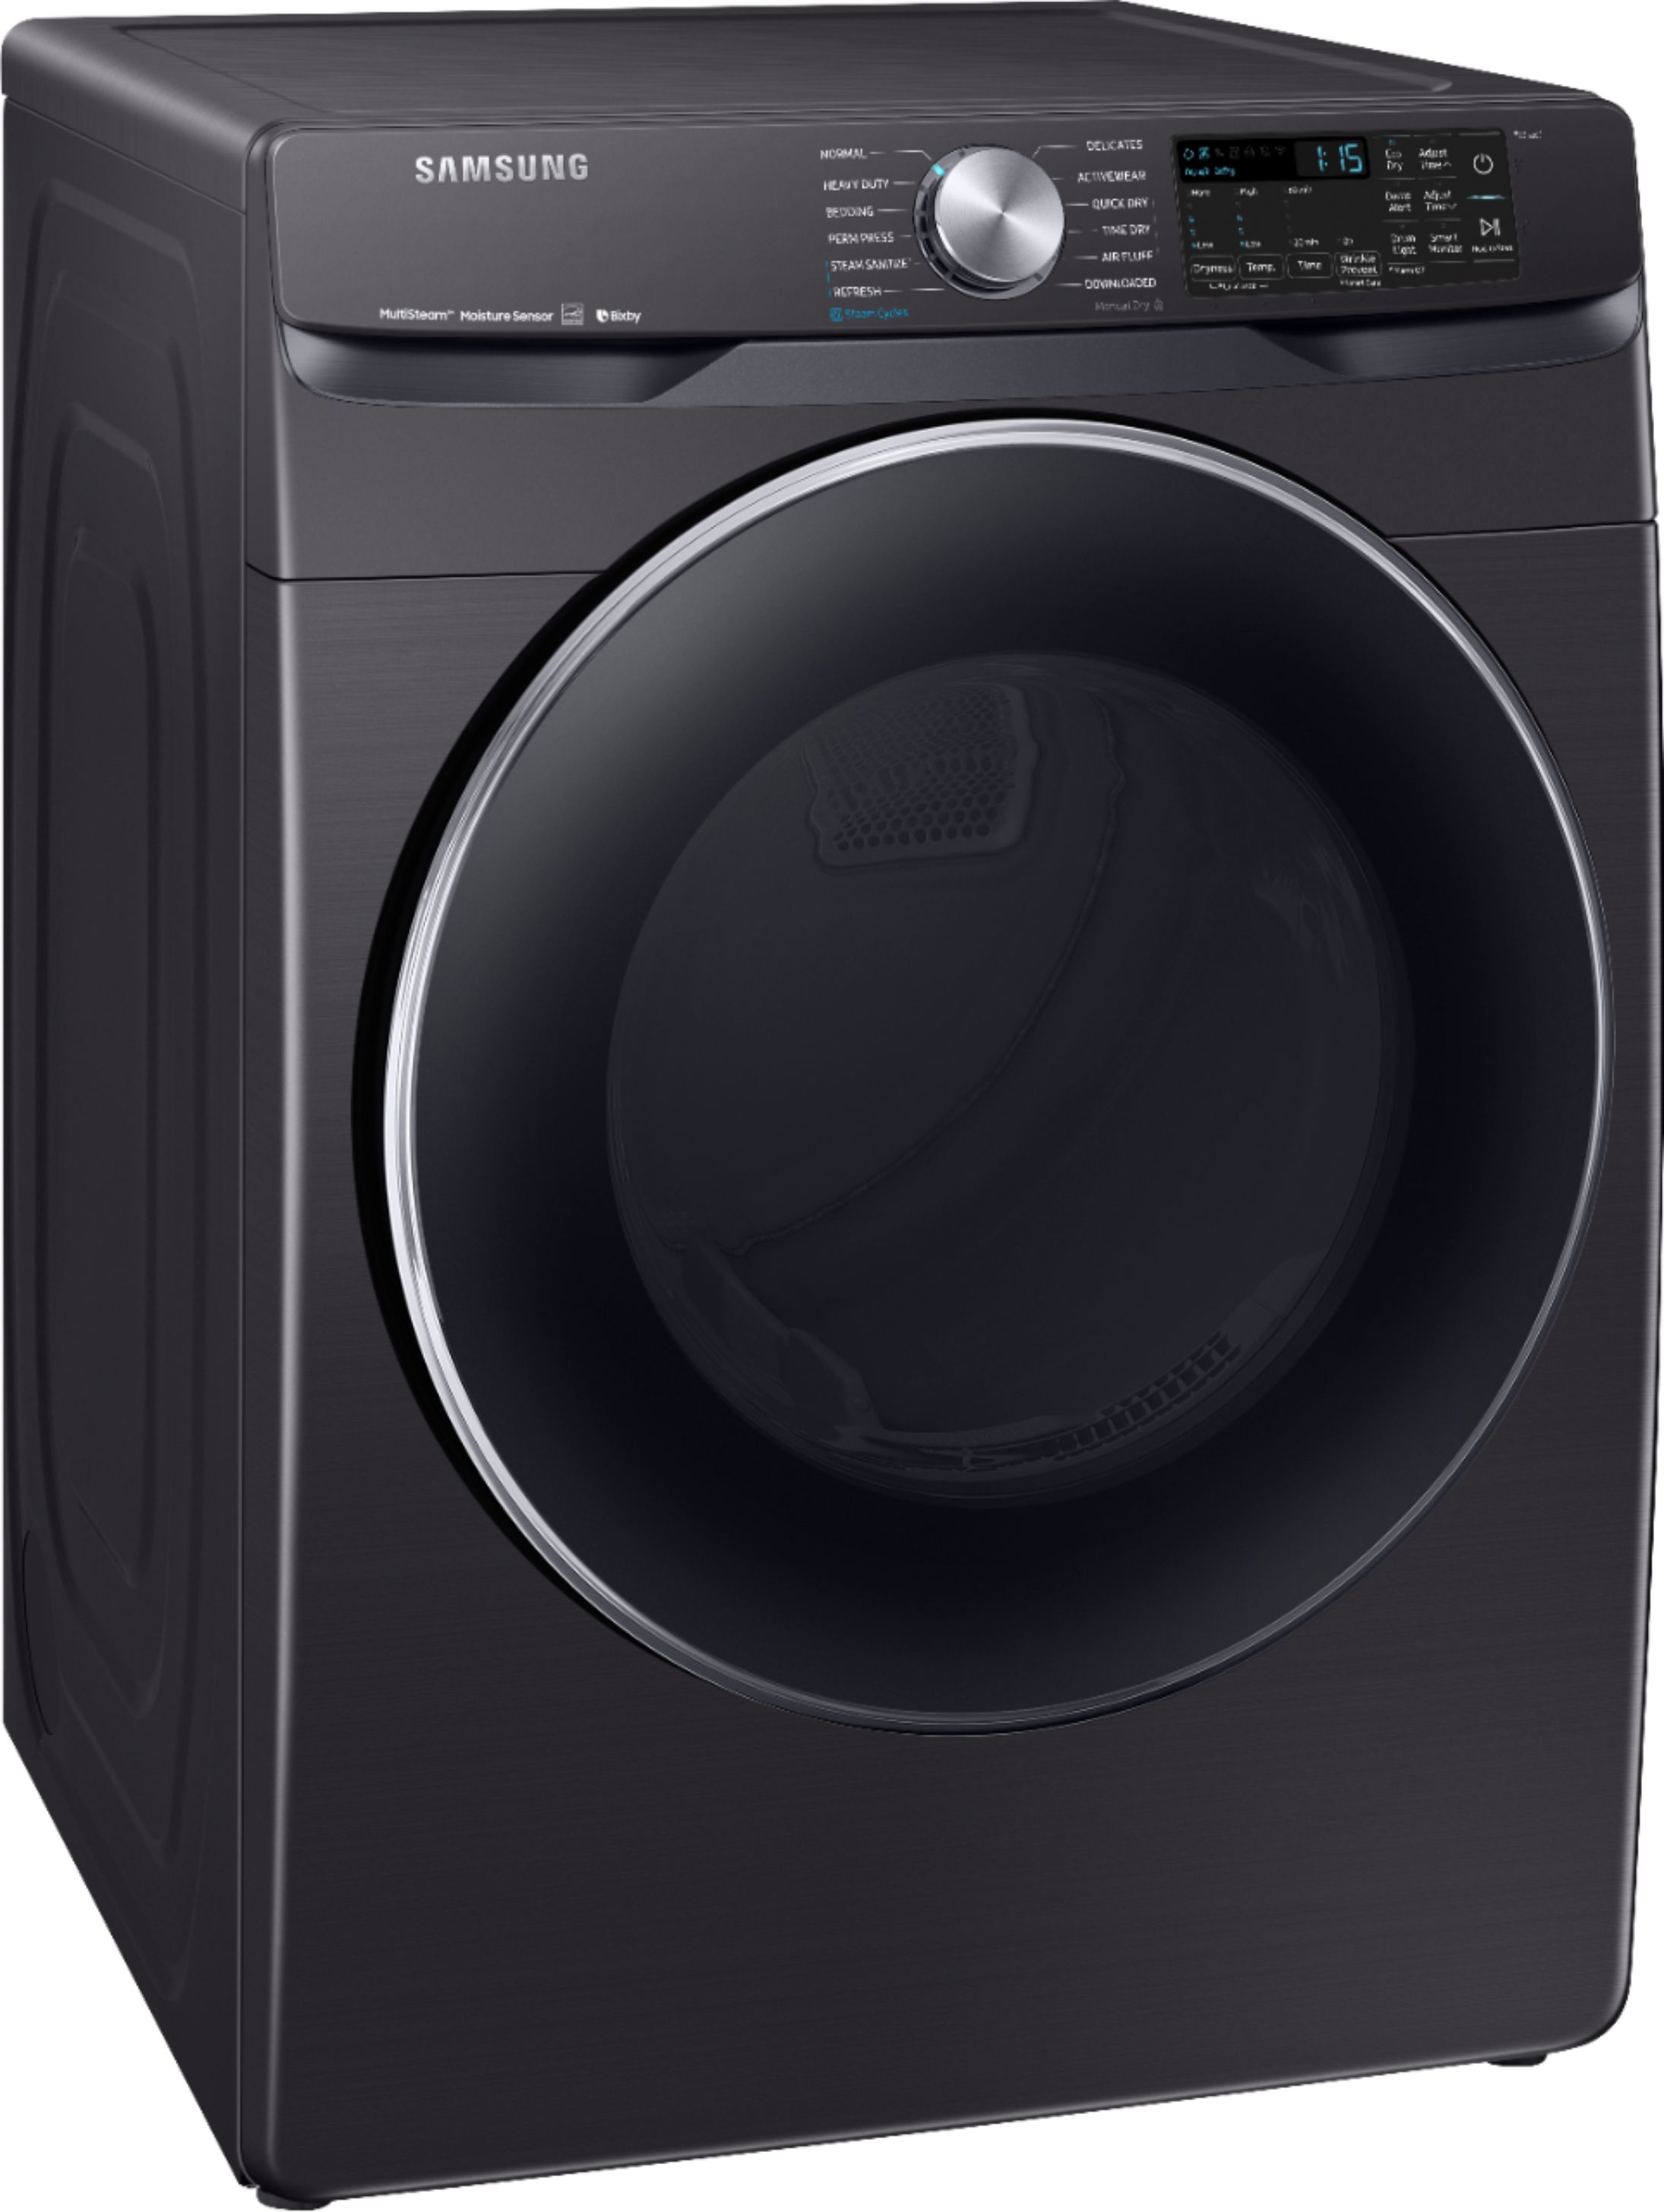 Angle View: Samsung - 7.5 Cu. Ft. Stackable Smart Gas Dryer with Steam and Sensor Dry - Black stainless steel